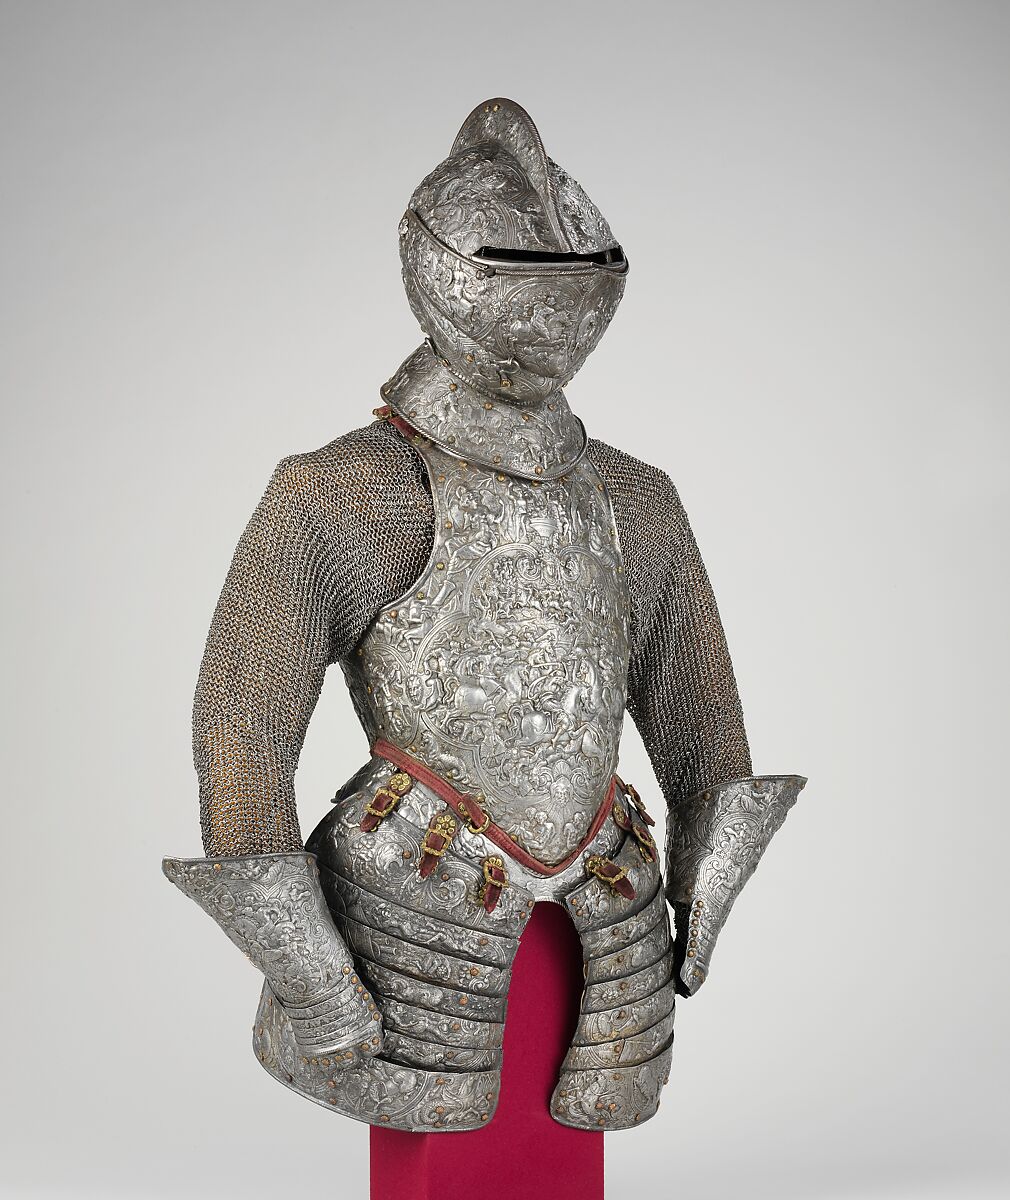 Portions of a Ceremonial Armor, Steel, copper alloy, gold, leather, textile, French 